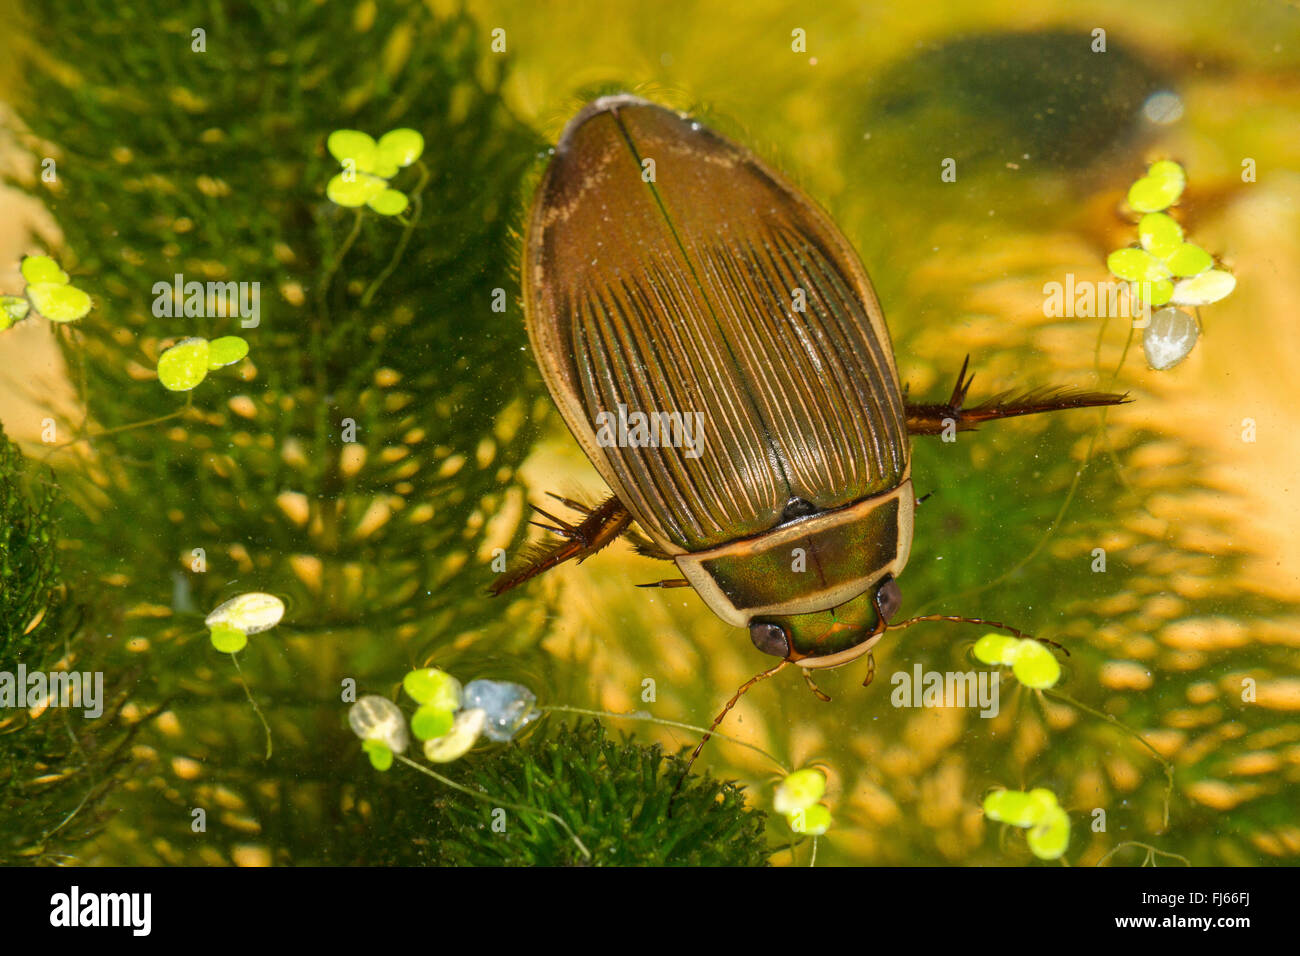 Great diving beetle (Dytiscus marginalis), female takes a breath at water surface, Germany, Bavaria Stock Photo